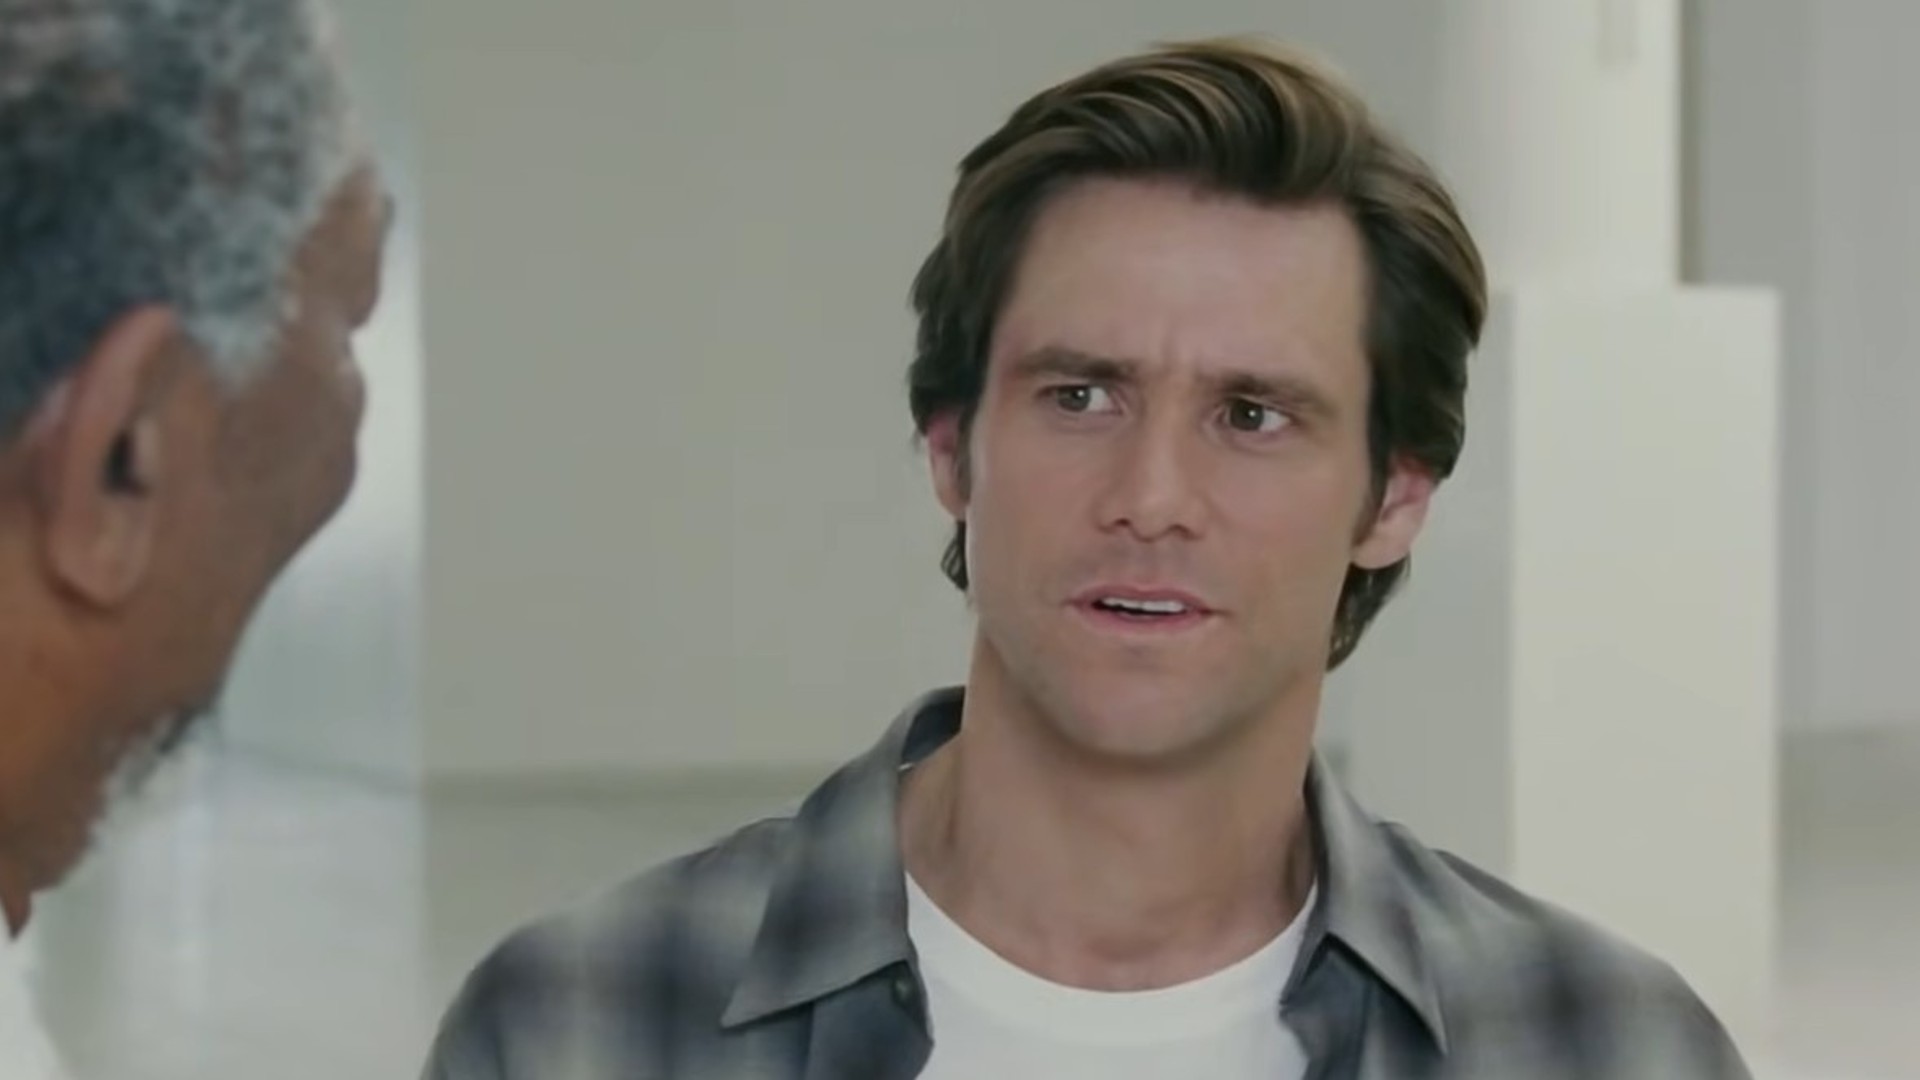 Bruce Almighty writers reveal scrapped plans for 'Brucifer', their Satan-centric sequel